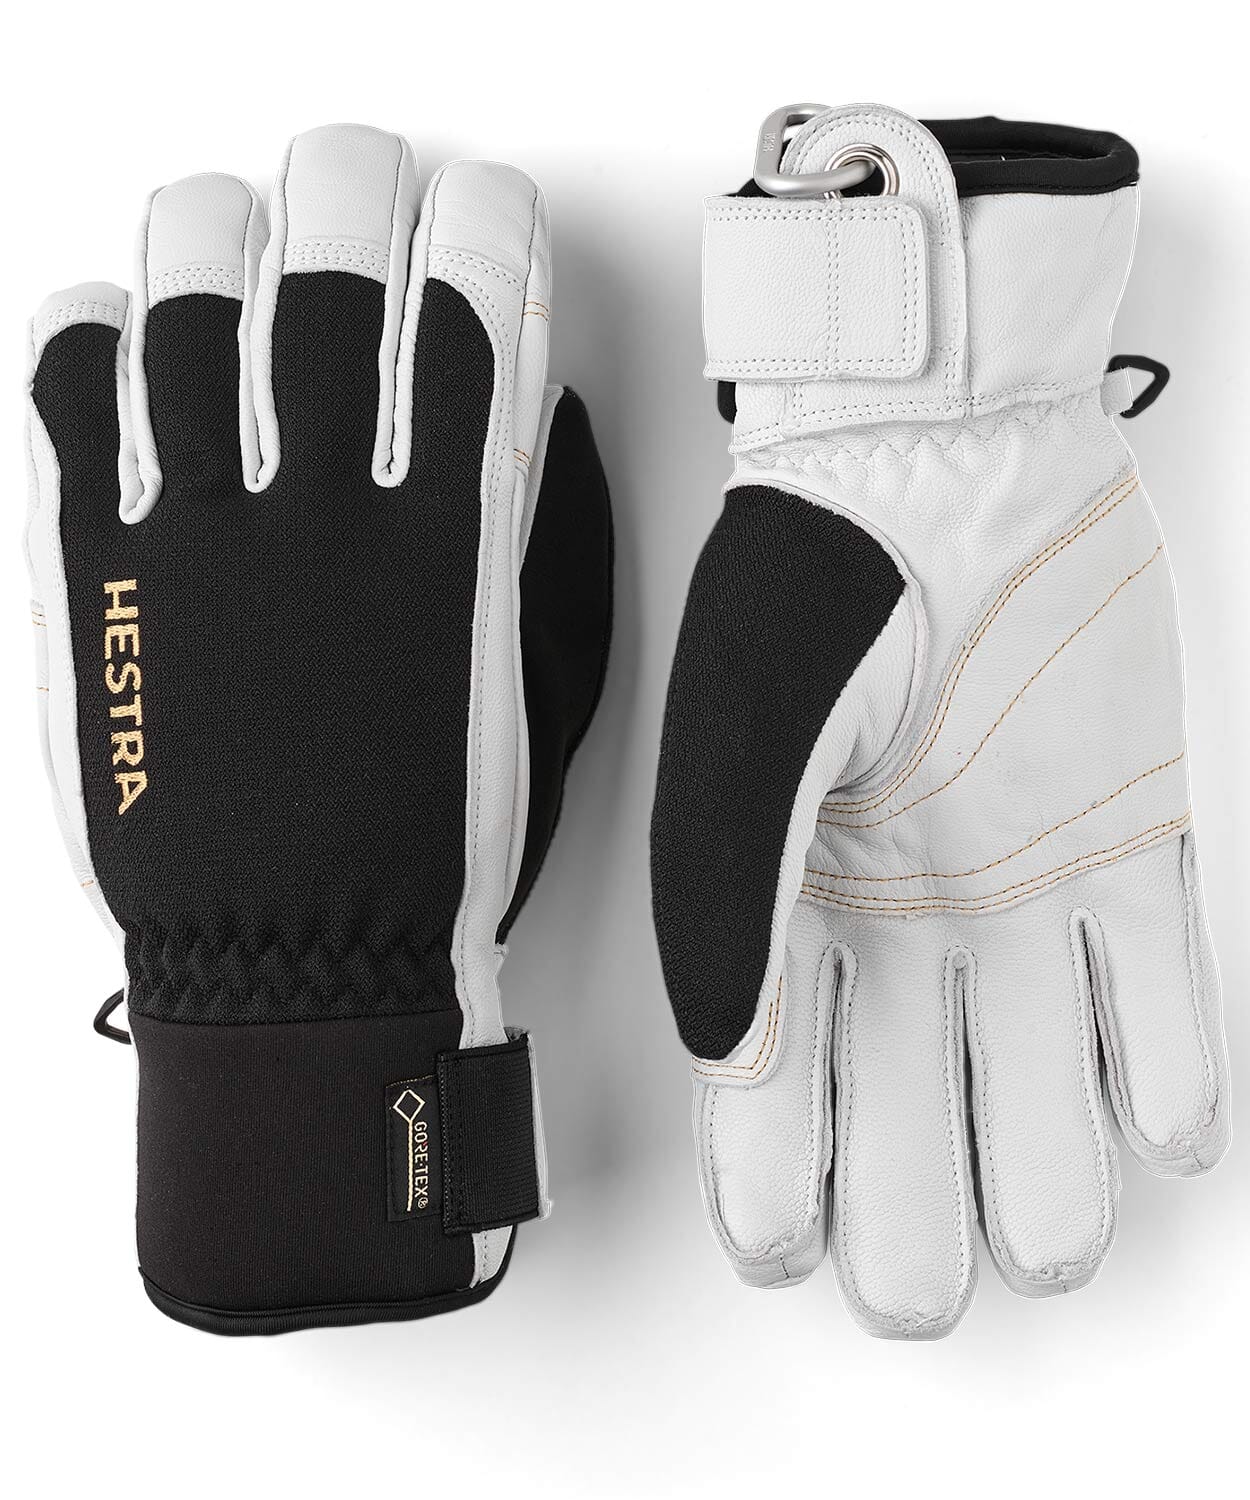 Army Leather Short Gore-Tex Glove Gloves Hestra Black/Offwhite 7 - S 